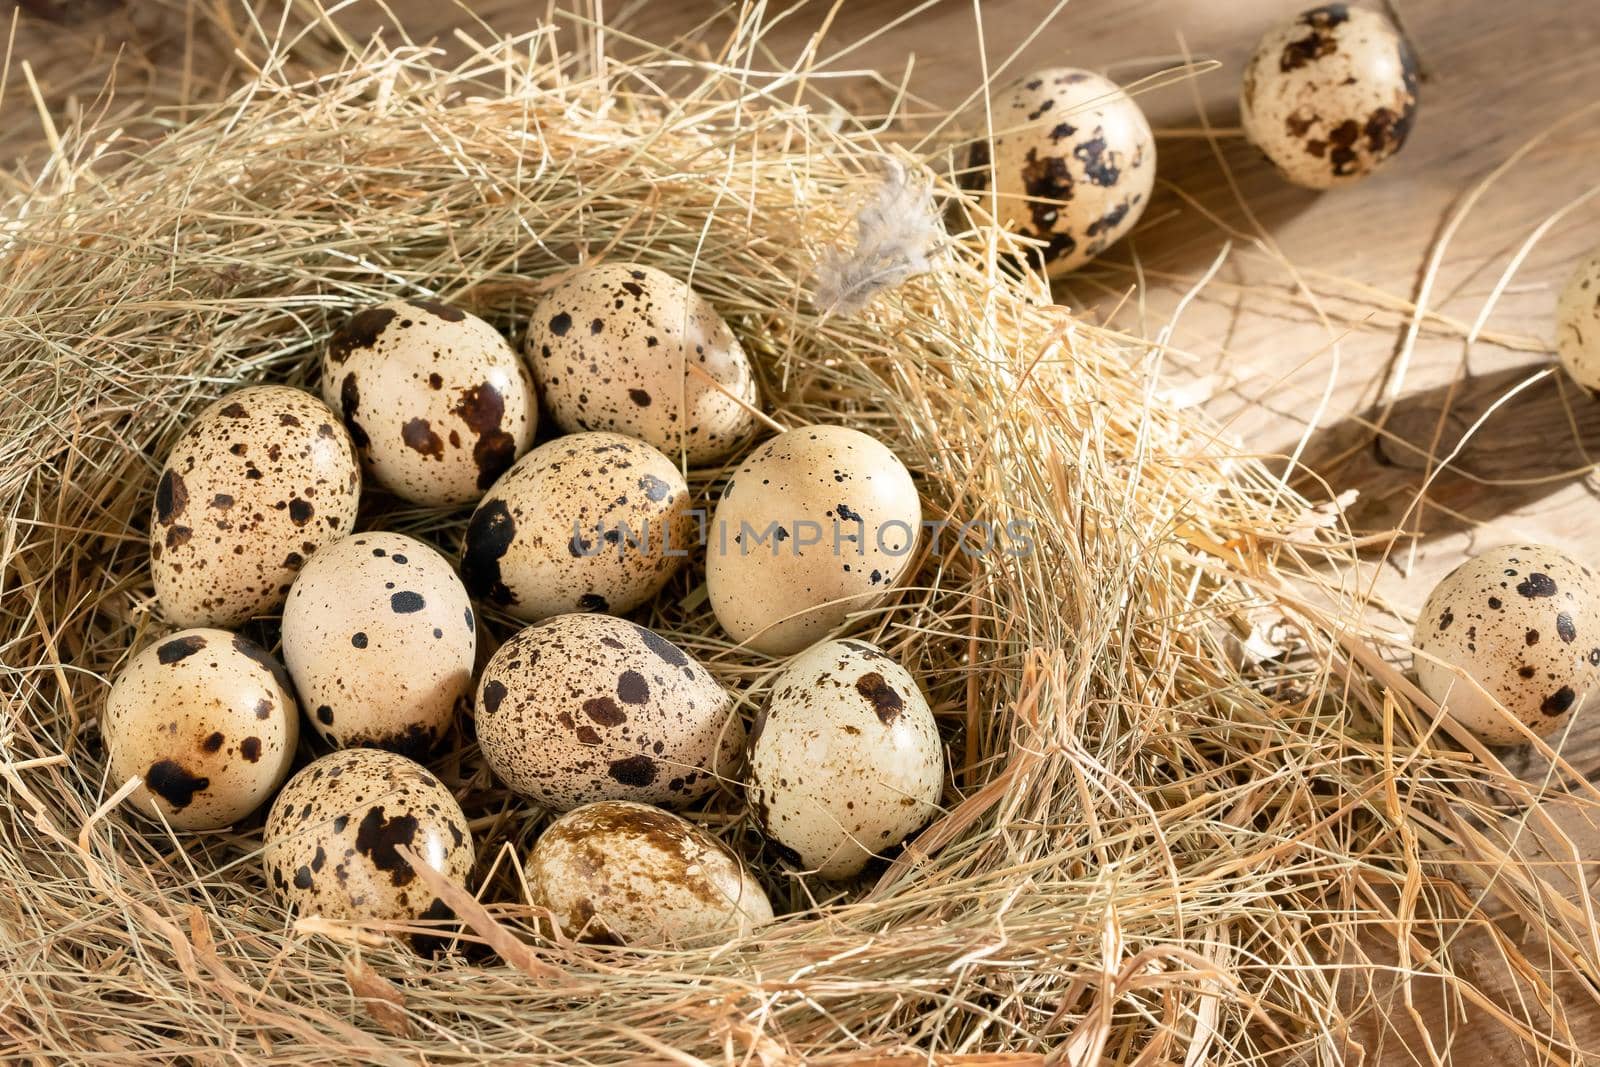 Several quail eggs in a decorative nest made of straw on a wooden table close-up.